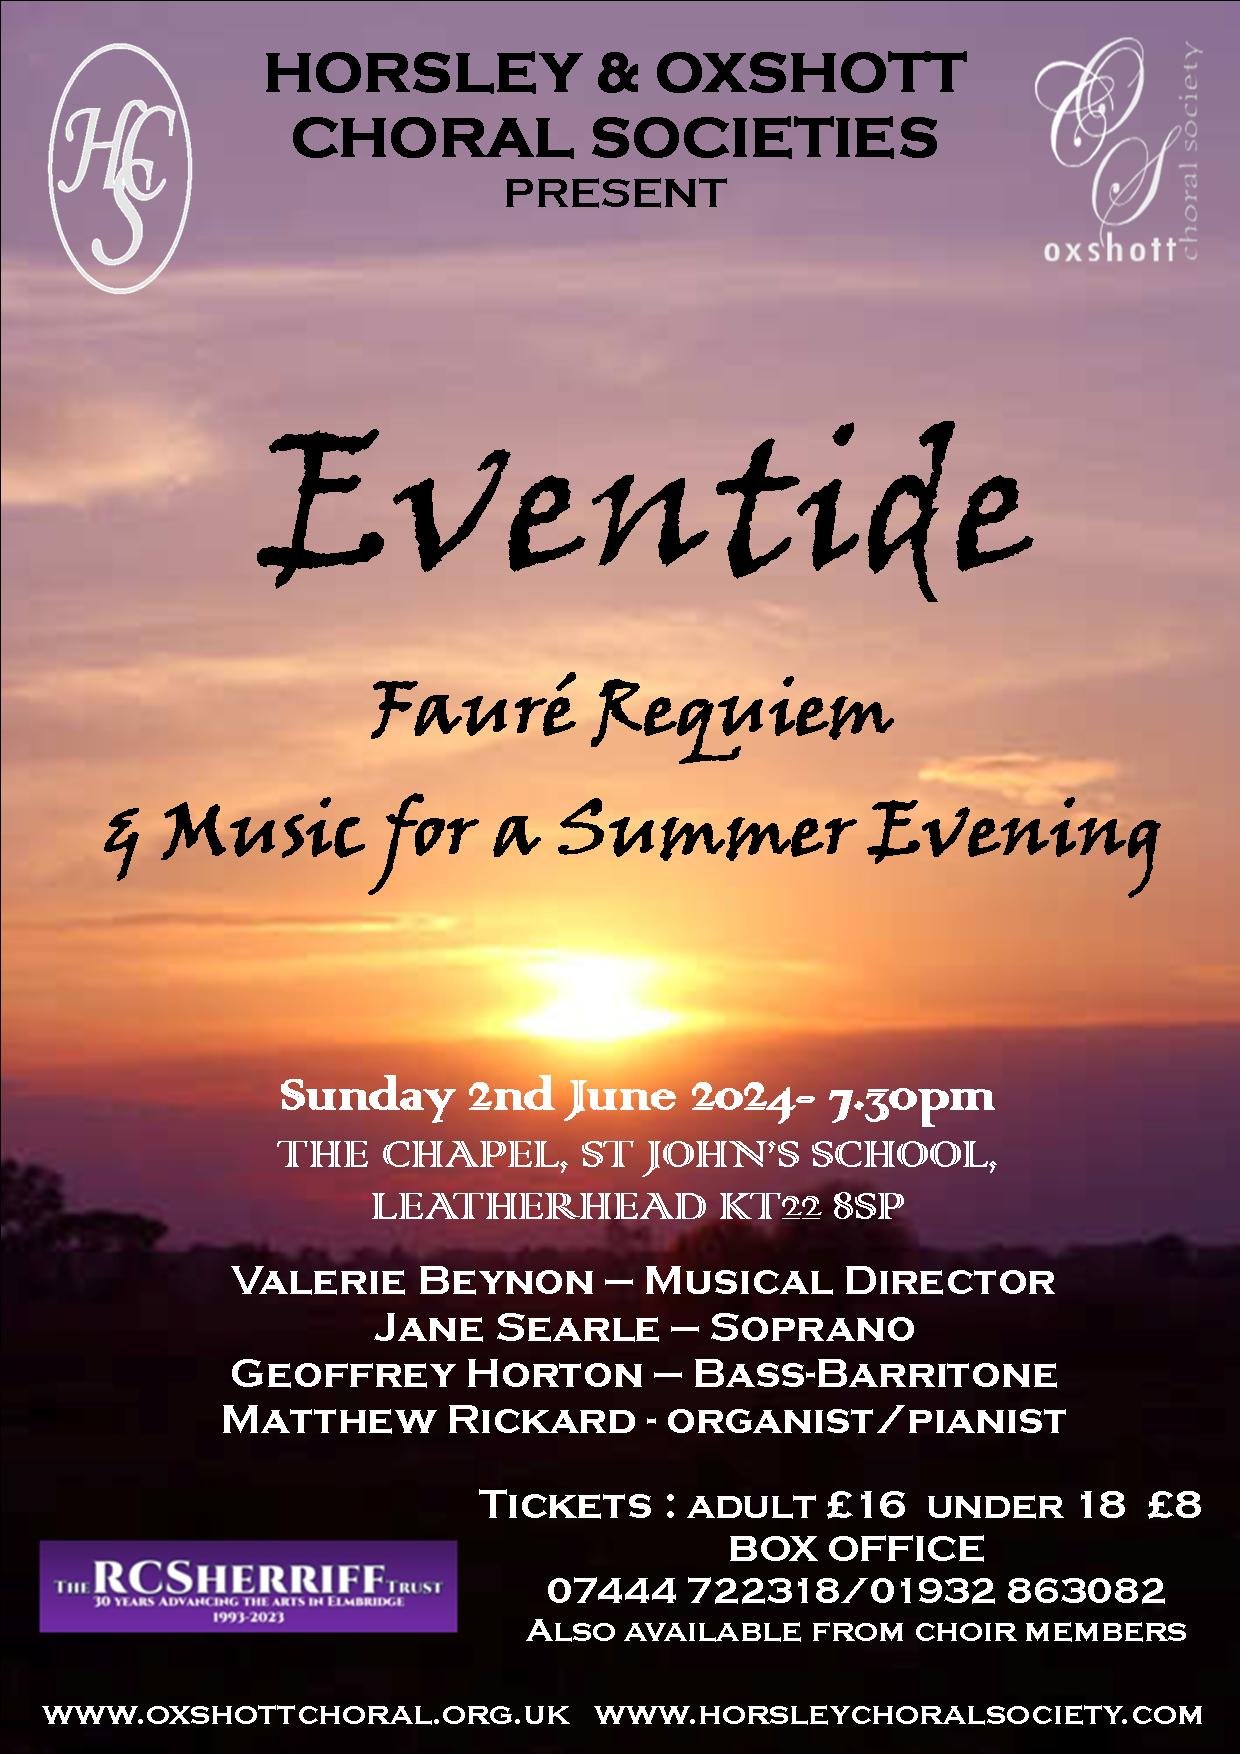 Our friends at Horsley Choral Society have a lovely concert coming up on 2nd June. Tickets are available by calling 07444 722318. You may recognise the accompanist as our very own Matthew Rickard Do go and support them if you can. #localmusic